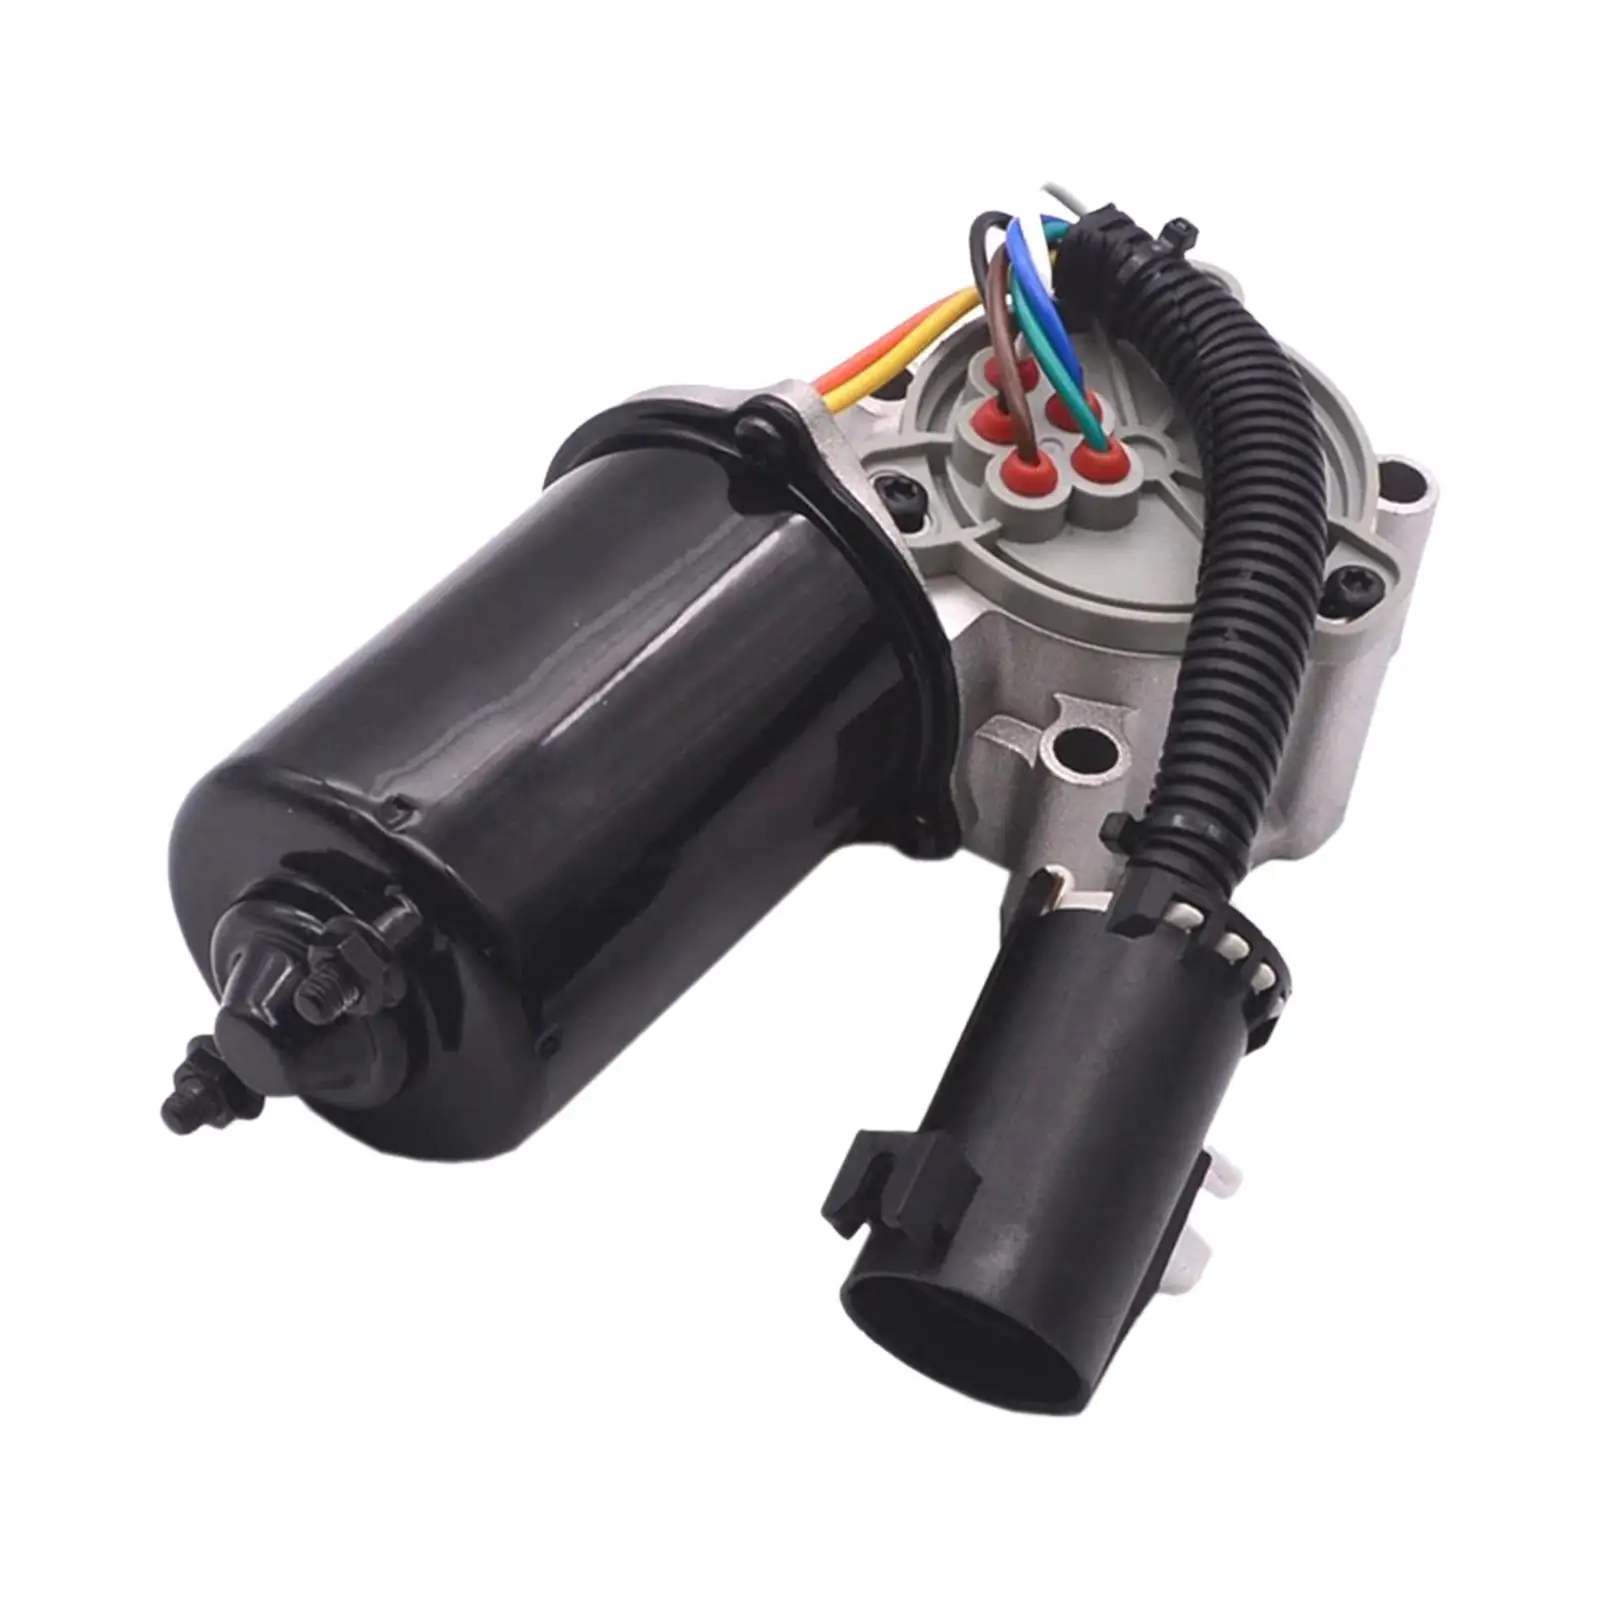 47303-h1010 Shift Motor Replaces Car Accessories High Performance Spare Parts